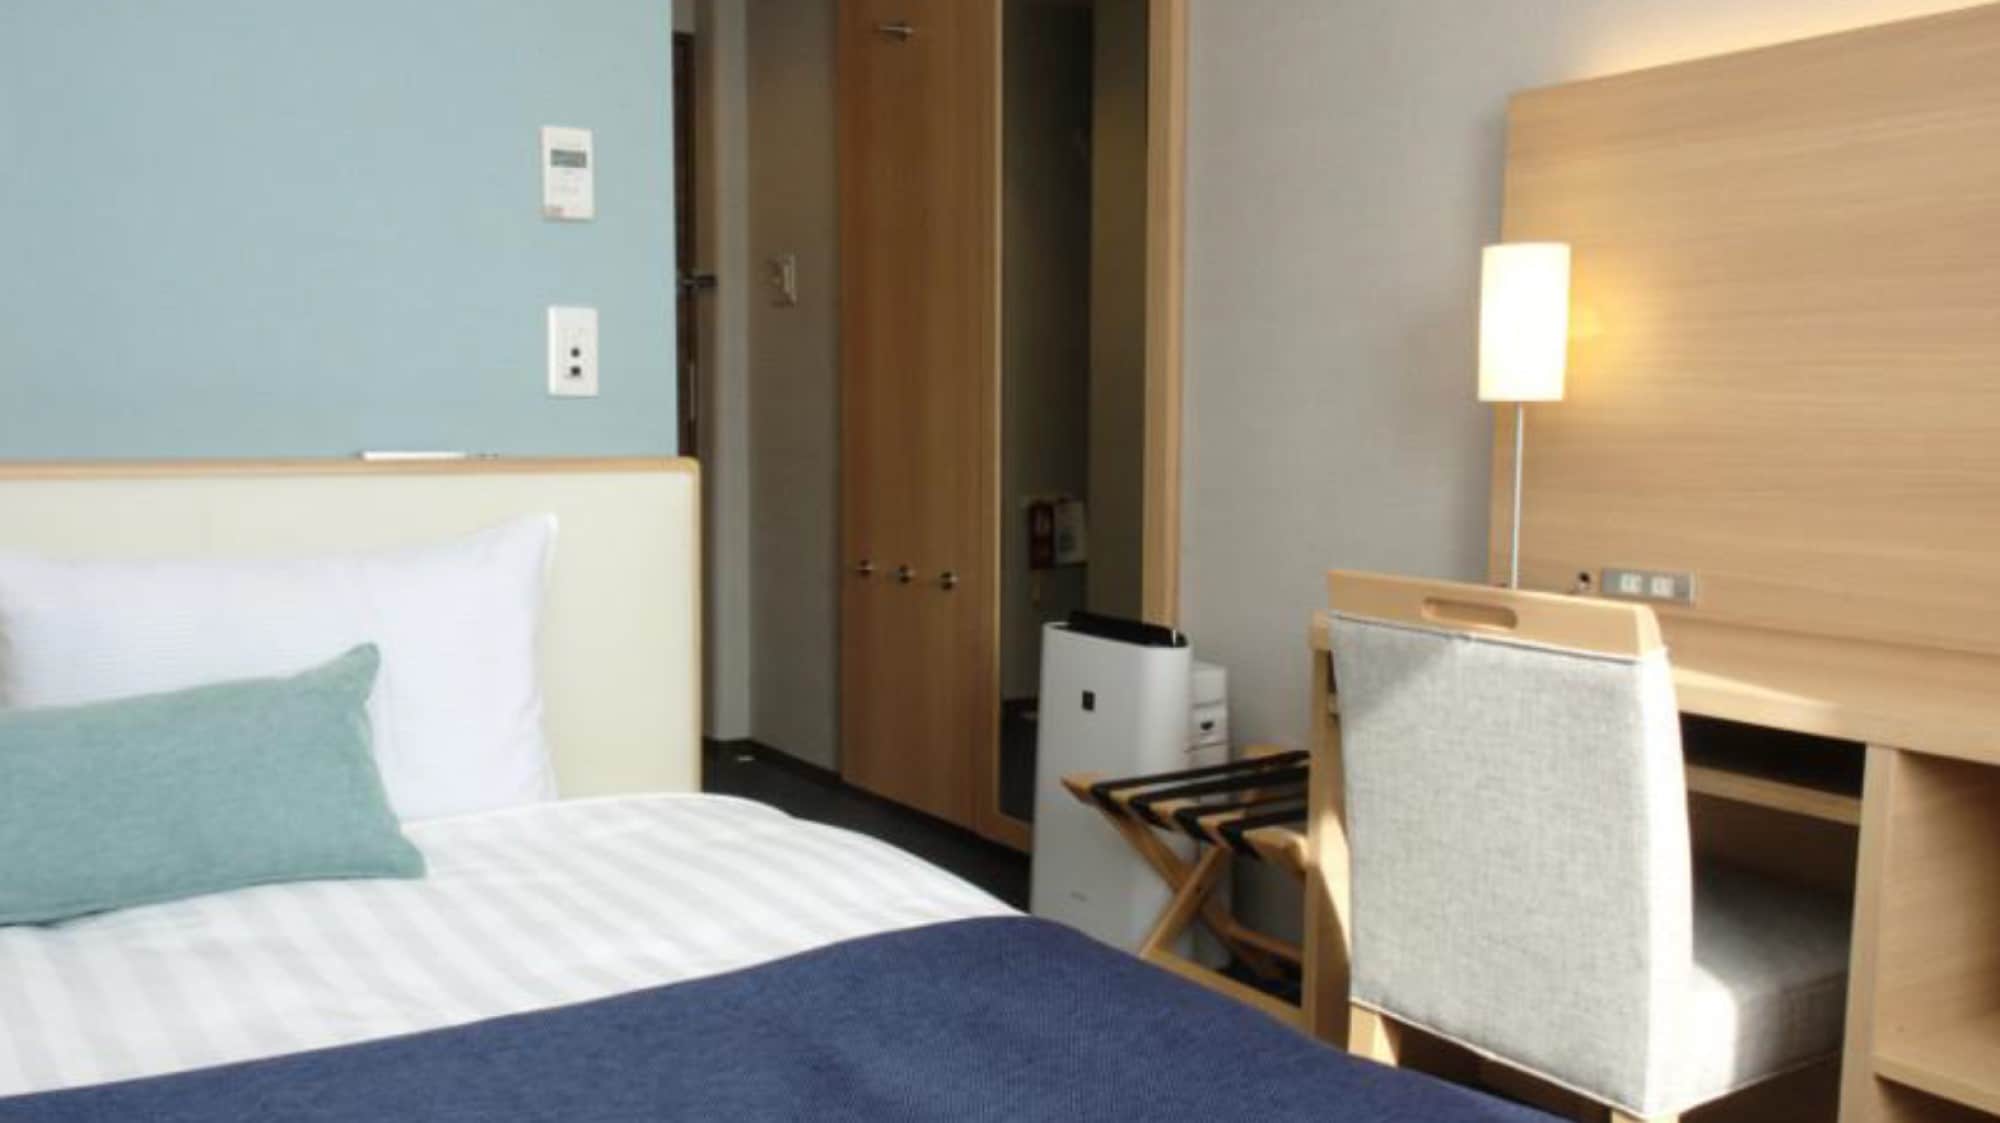 Deluxe single (upgraded guest room) Size: 12㎡ Semi-double bed